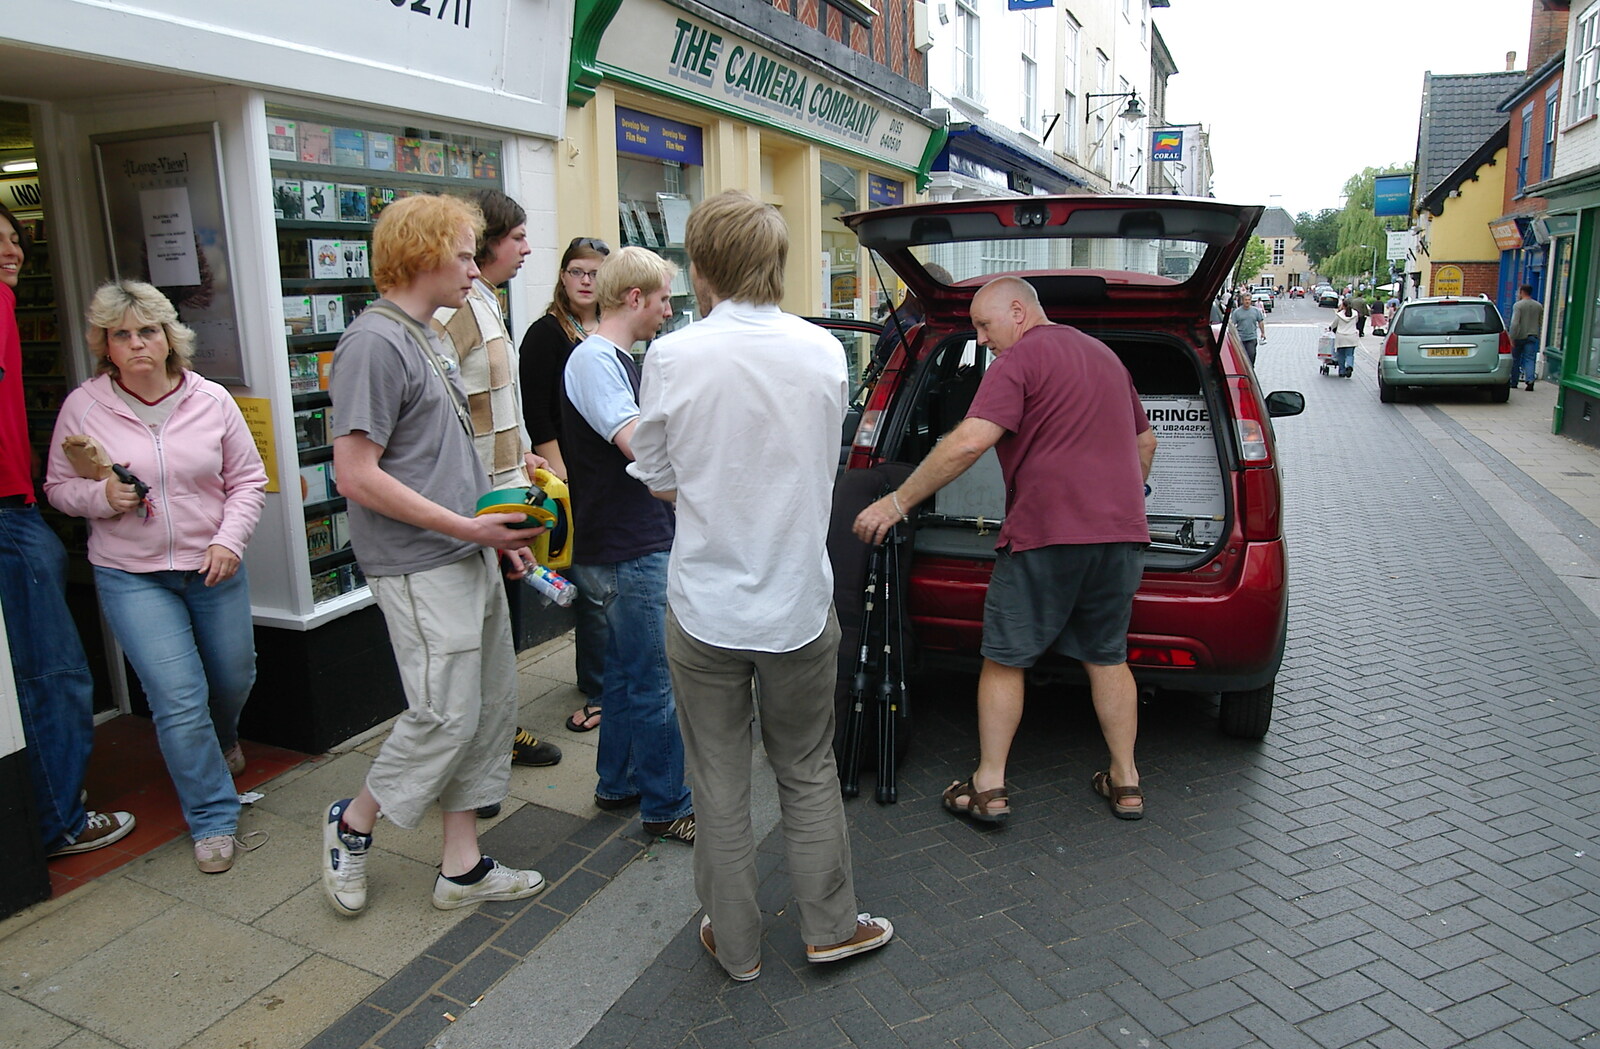 On Mere Street, Rob Folkard helps load up the gear from Richard Panton's Van and Alex Hill at Revolution Records, Diss and Cambridge - 29th July 2005